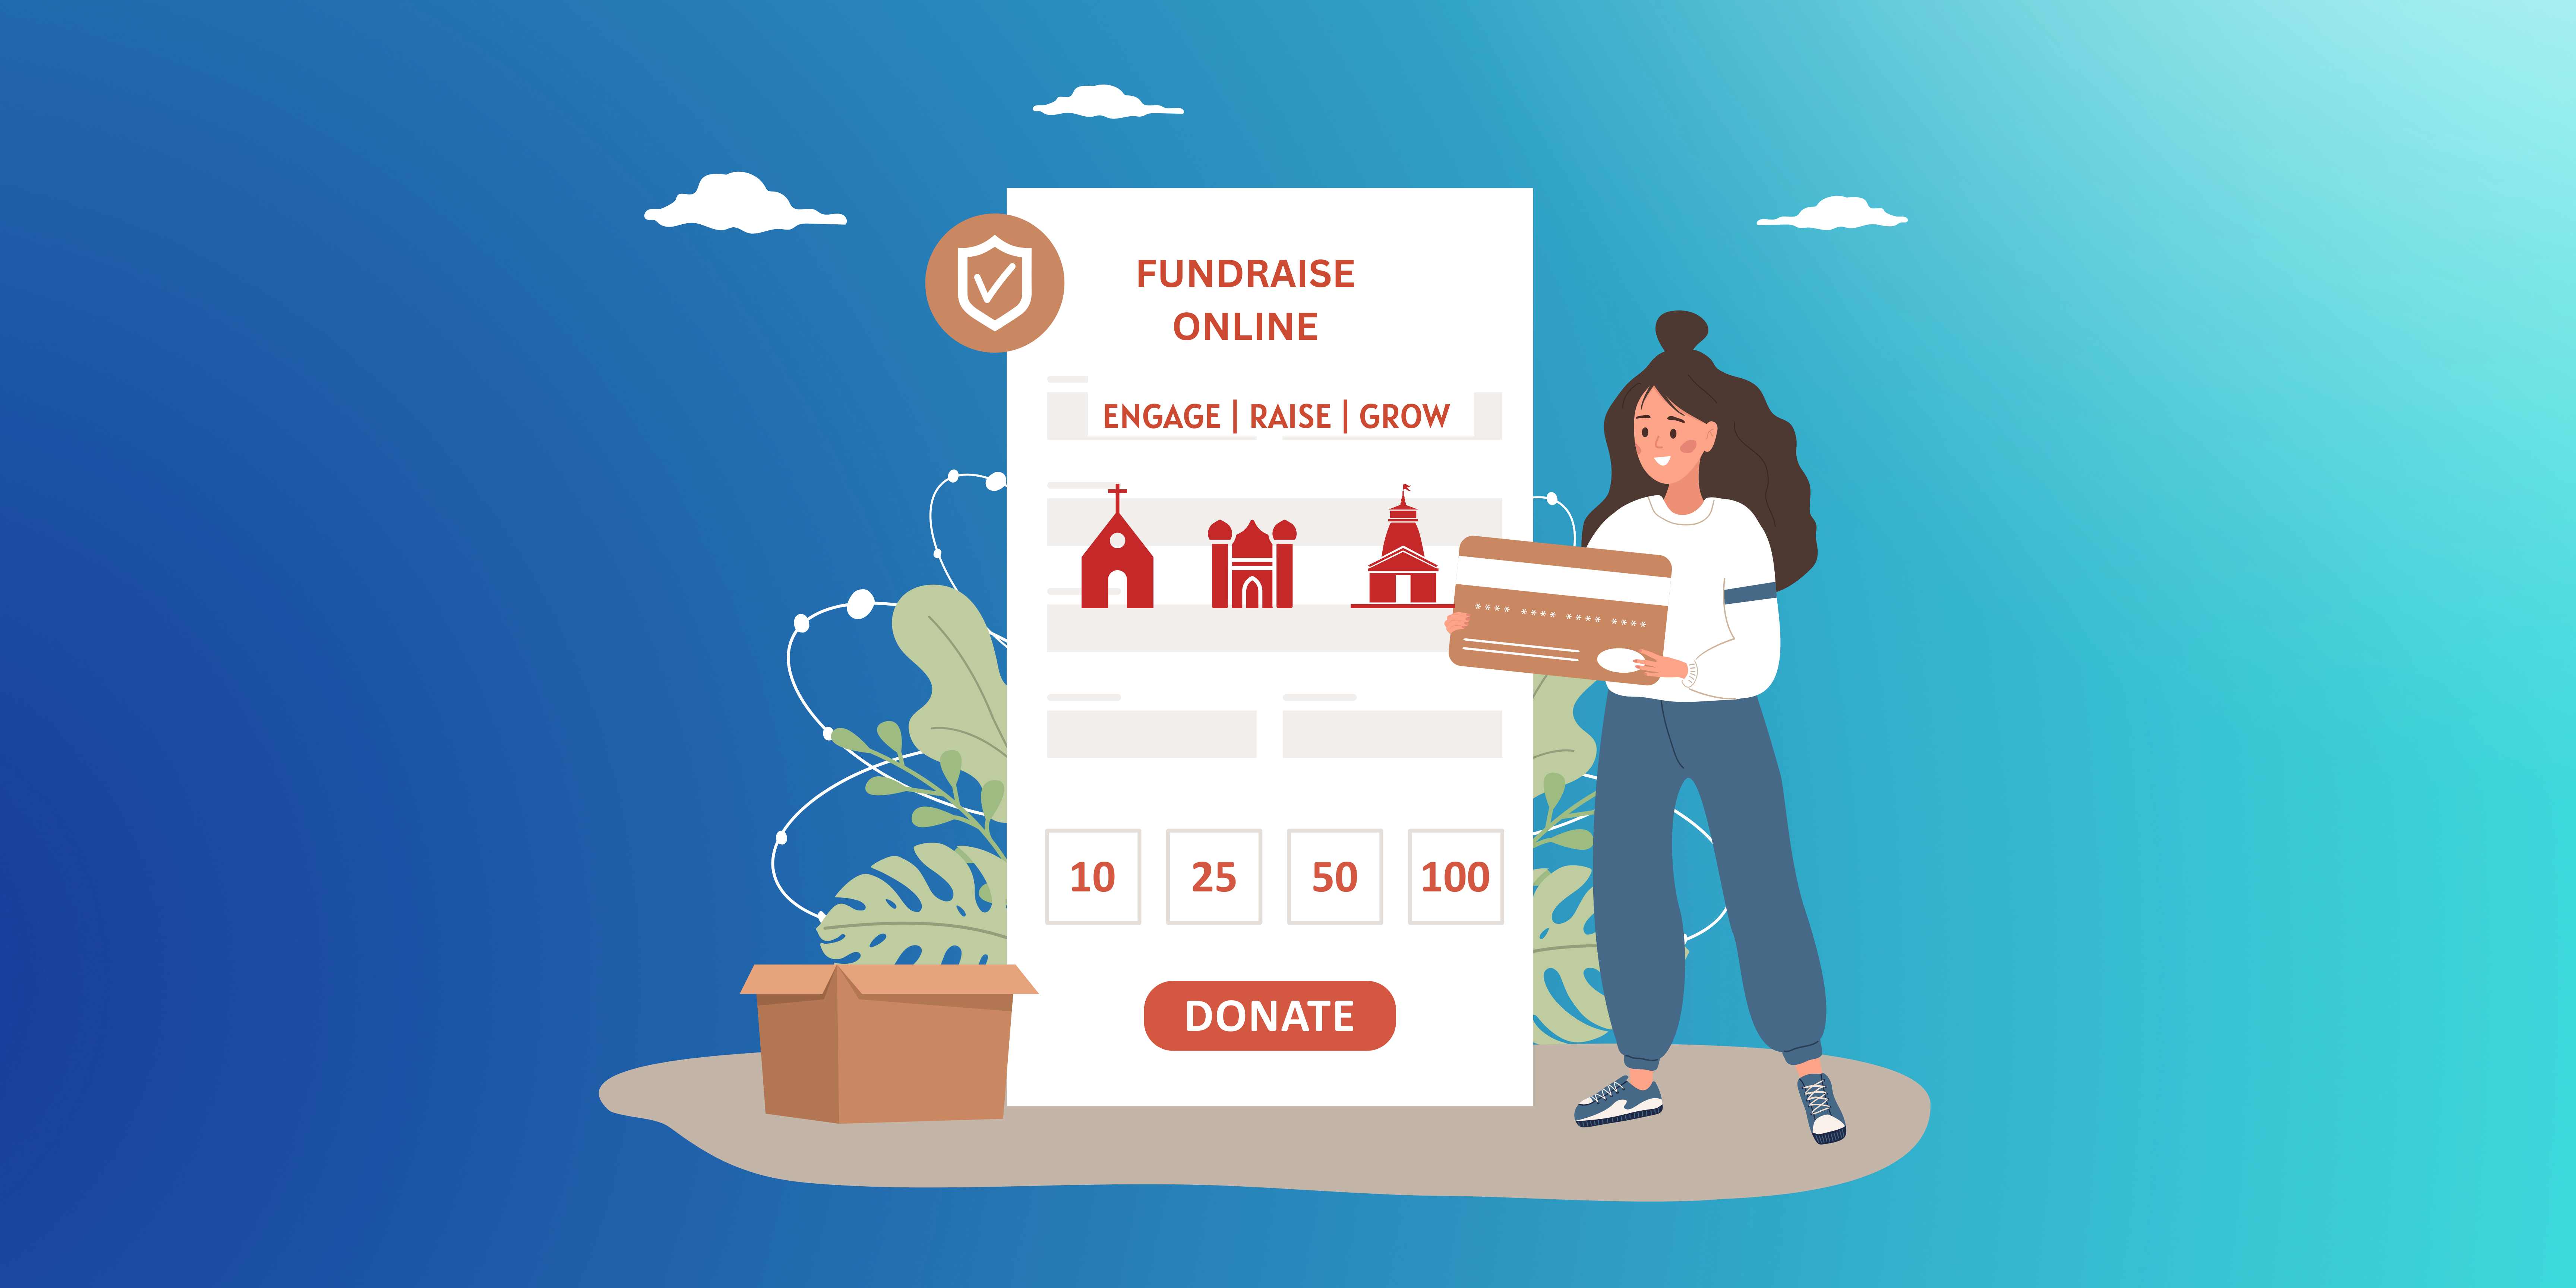 Build a Fundraising App For Religious Organizations